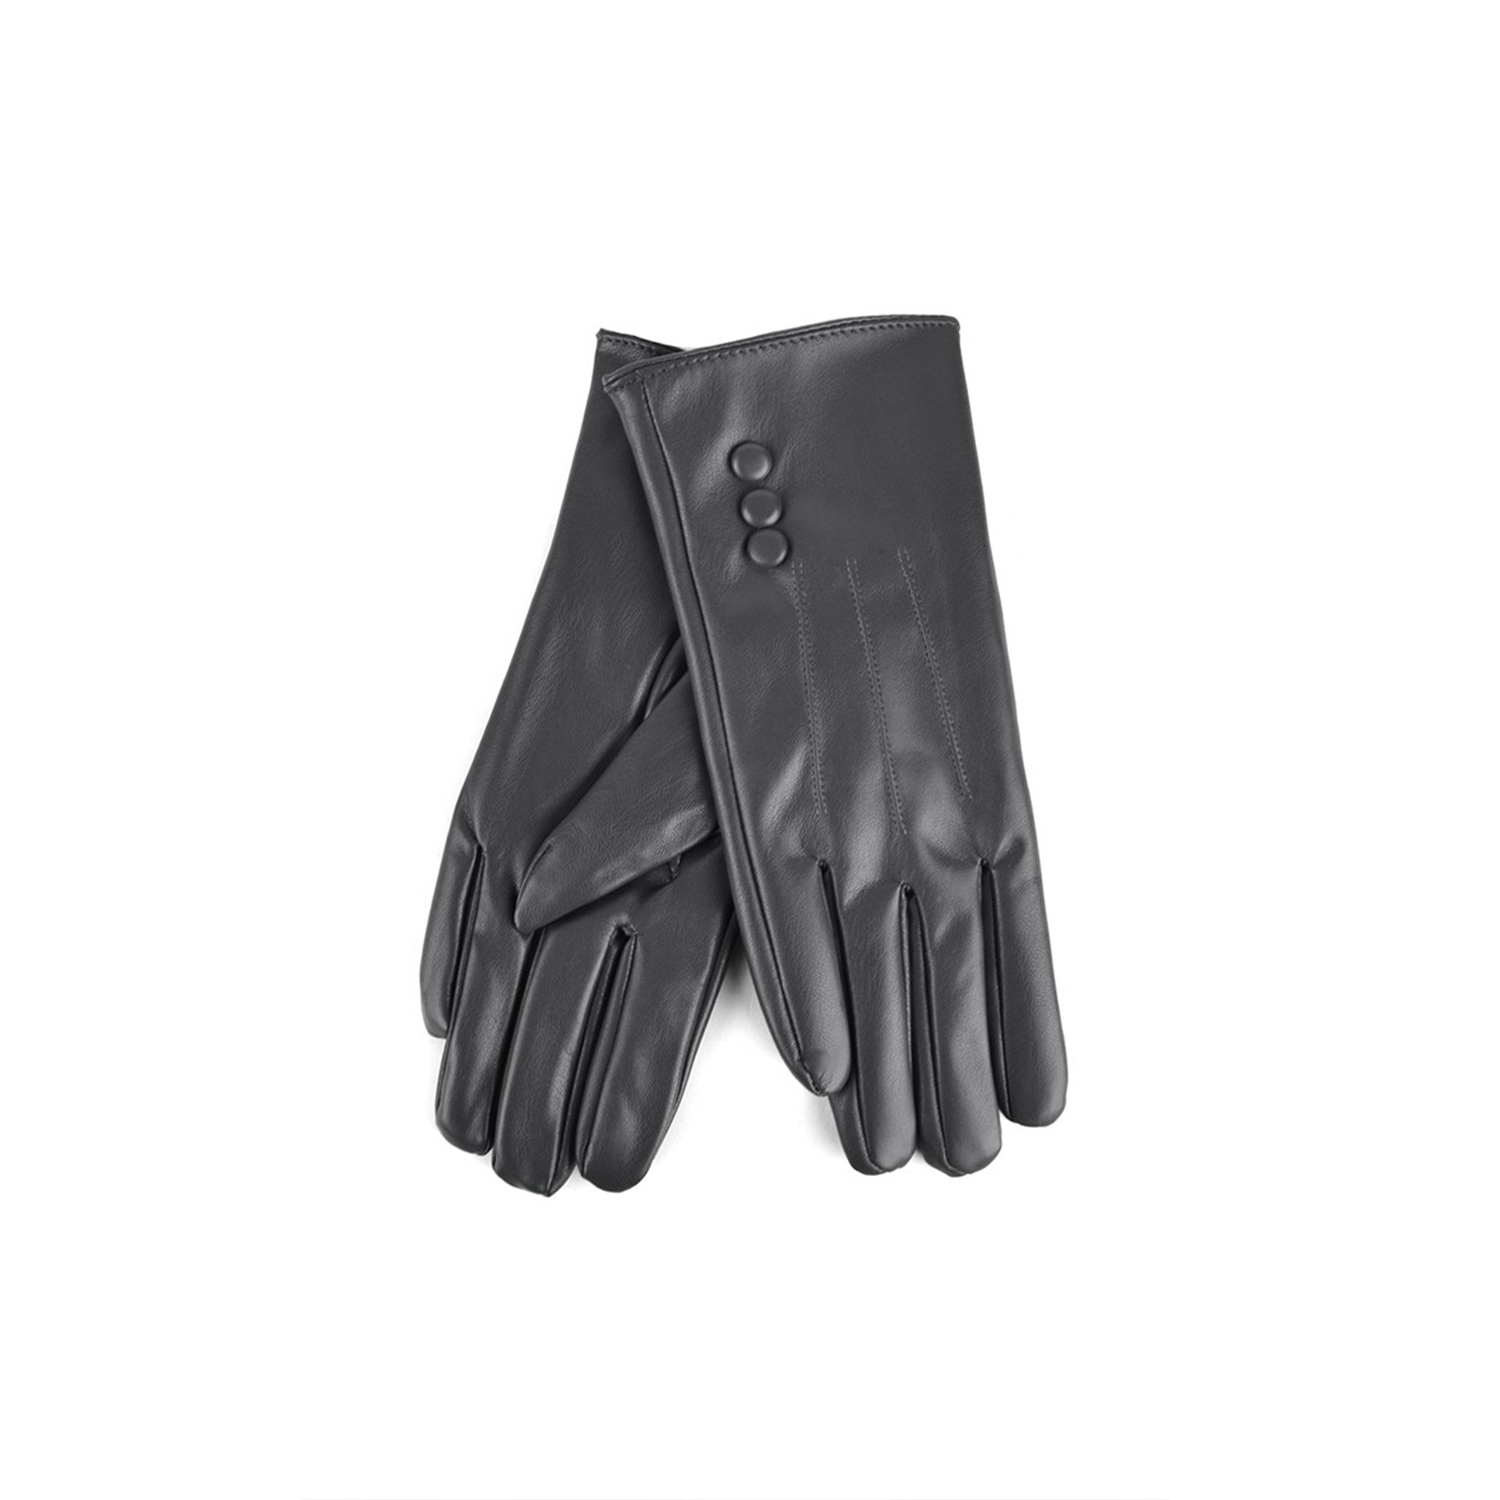 Touch Screen Glove. These soft and stylish faux leather gloves will have you texting all winter long!